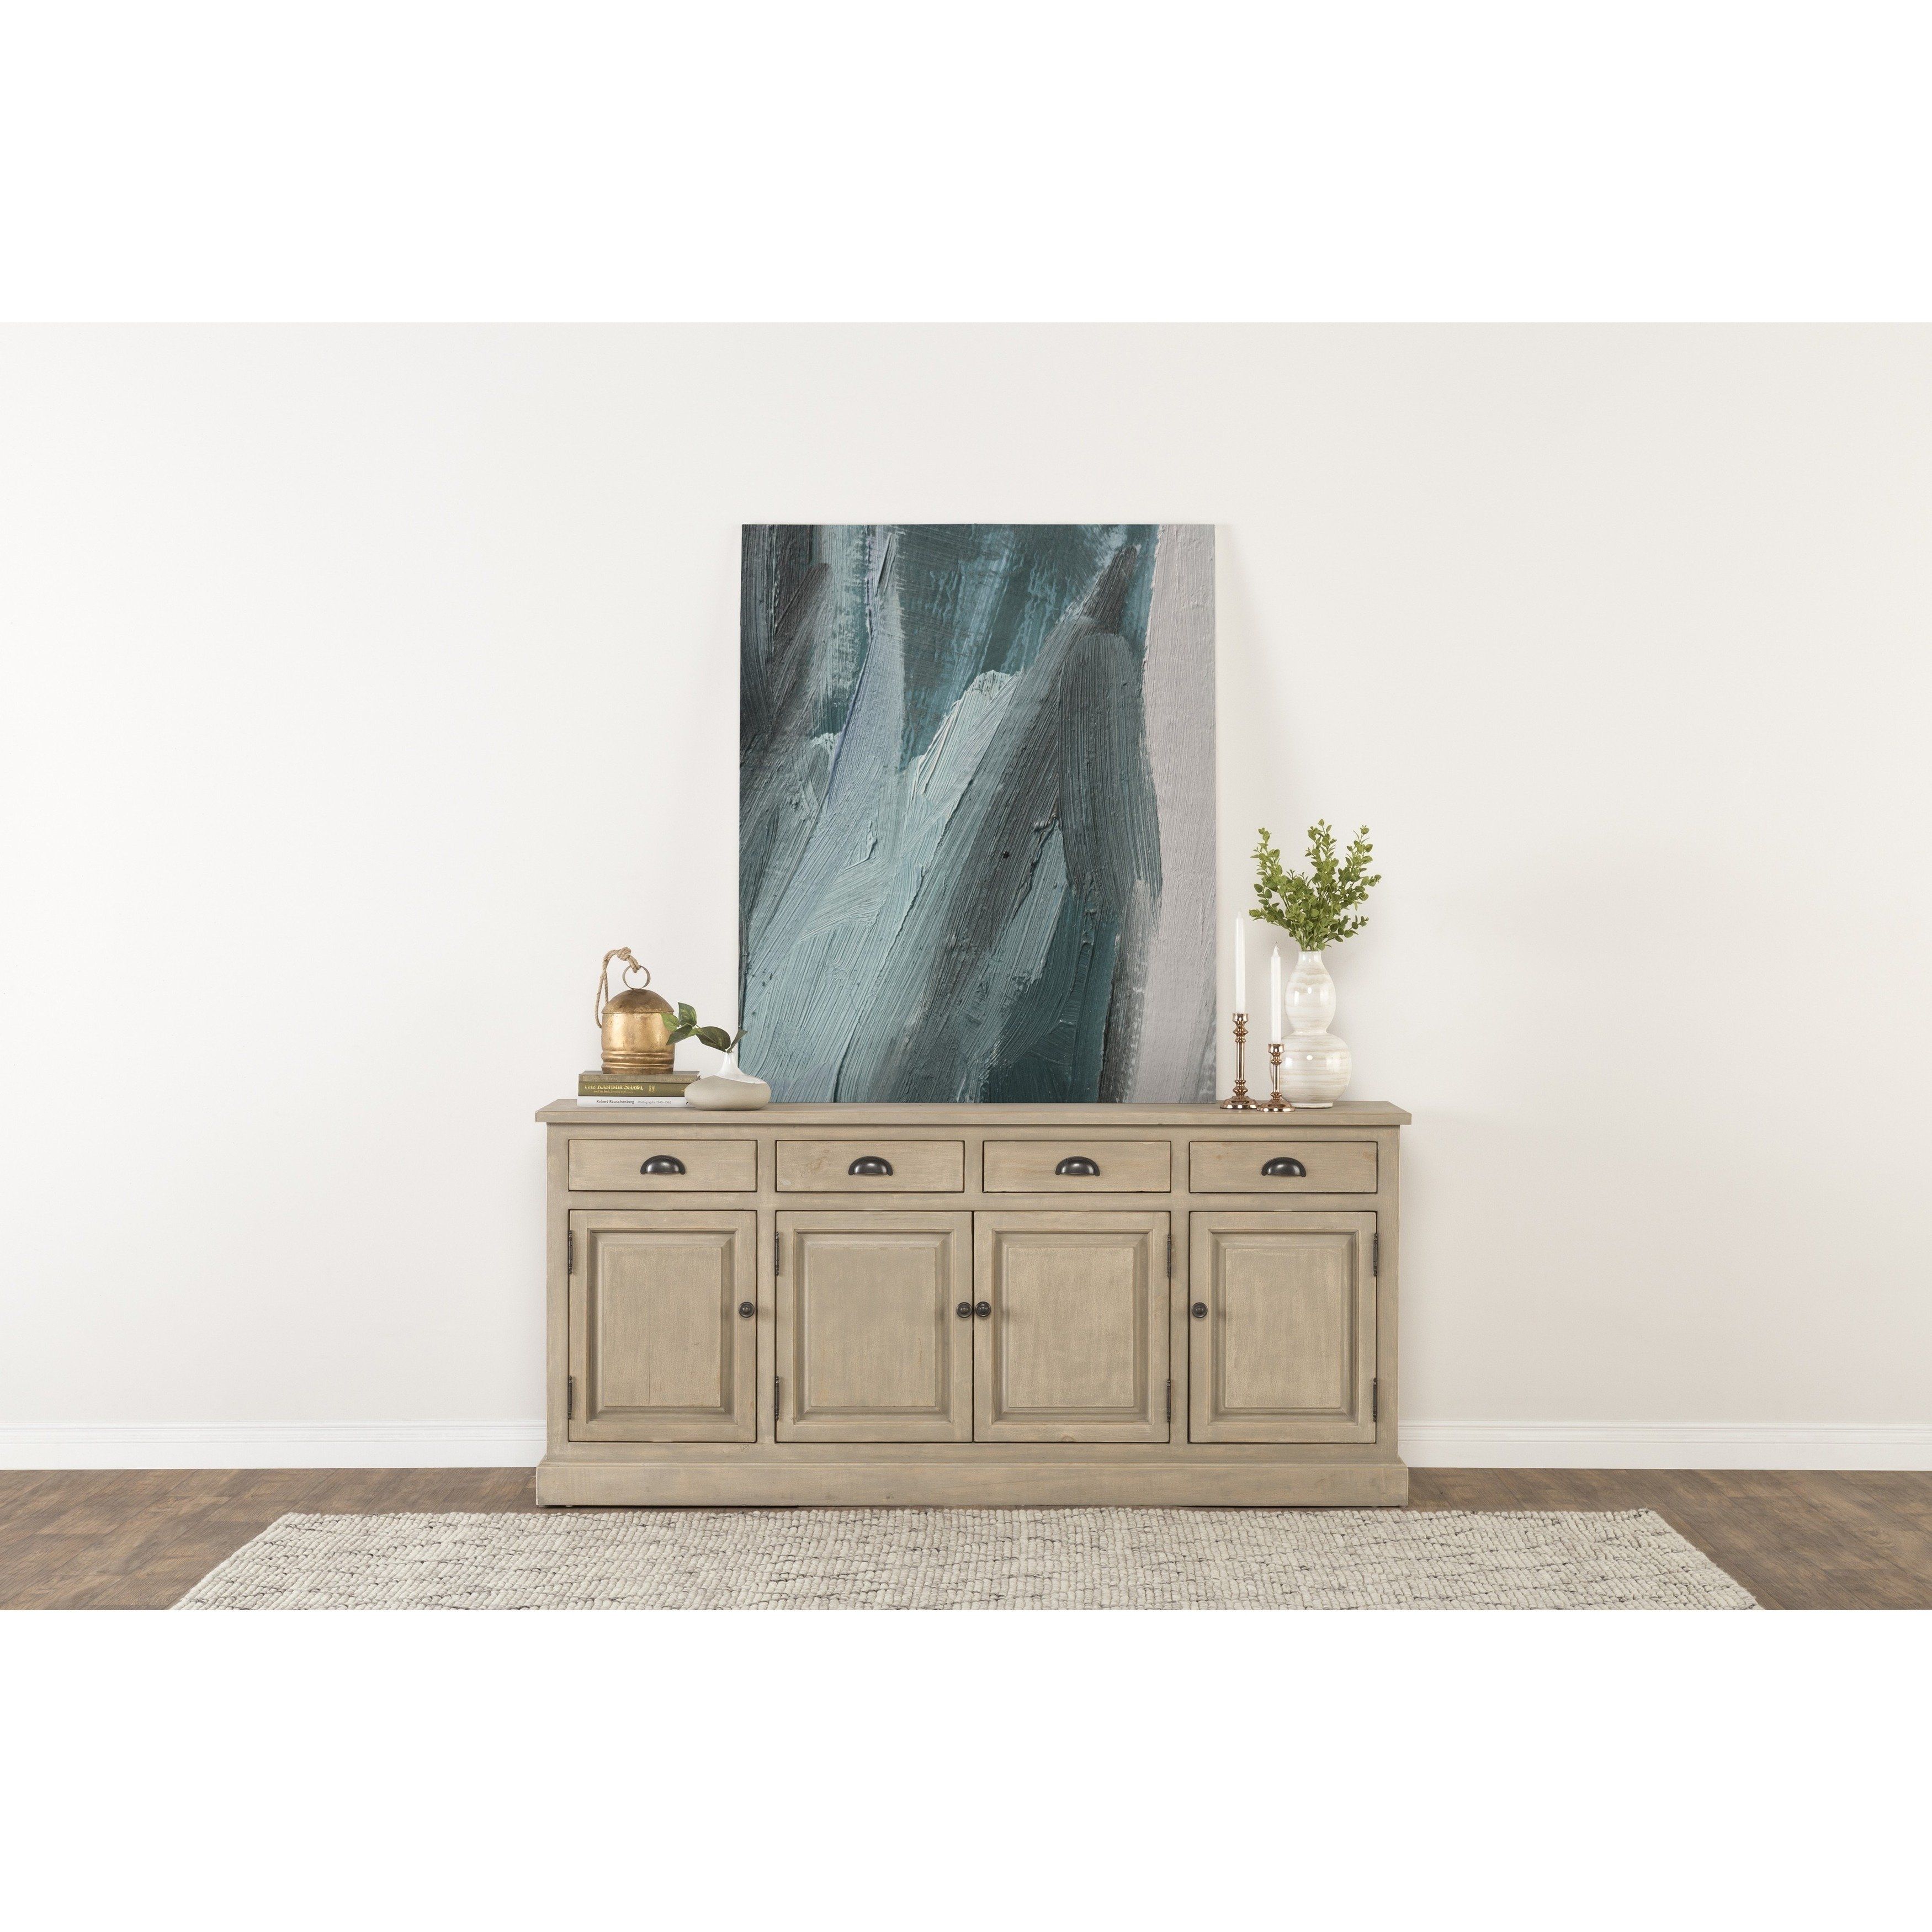 Shop Wilson Reclaimed Wood 79 Inch Sideboardkosas Home – Free In Natural Oak Wood 78 Inch Sideboards (View 26 of 30)